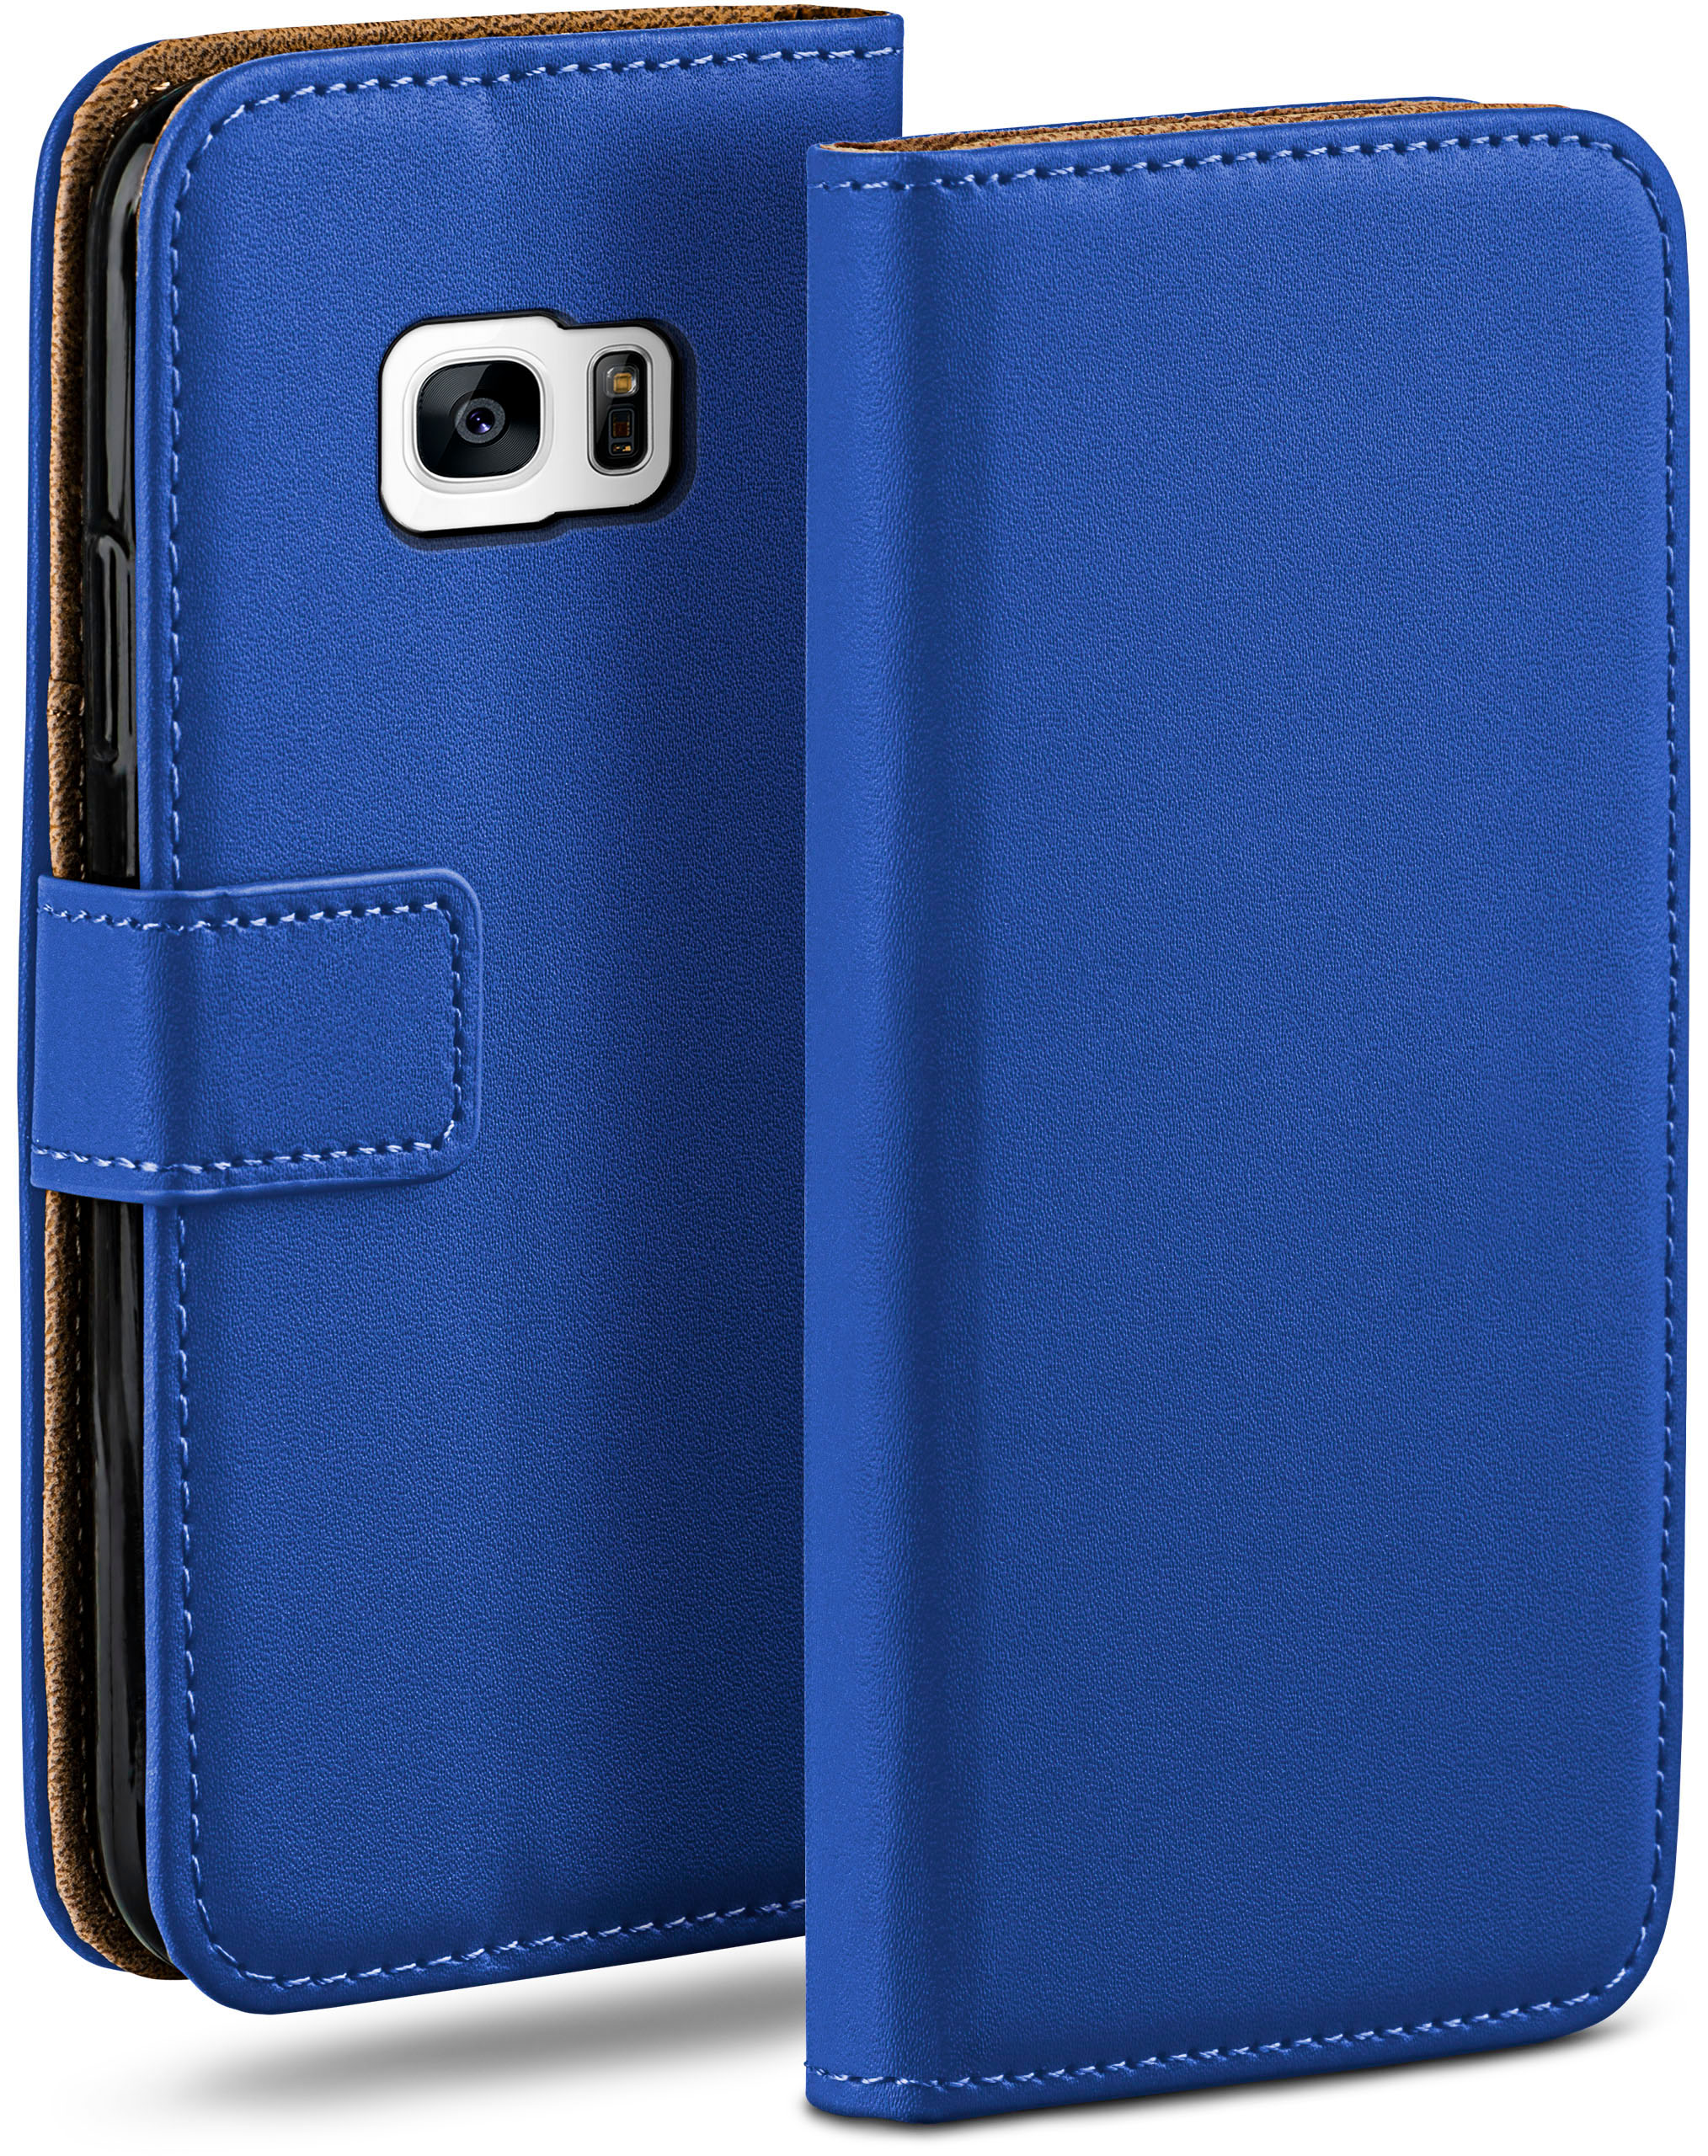 MOEX Book Case, Royal-Blue S7, Bookcover, Galaxy Samsung